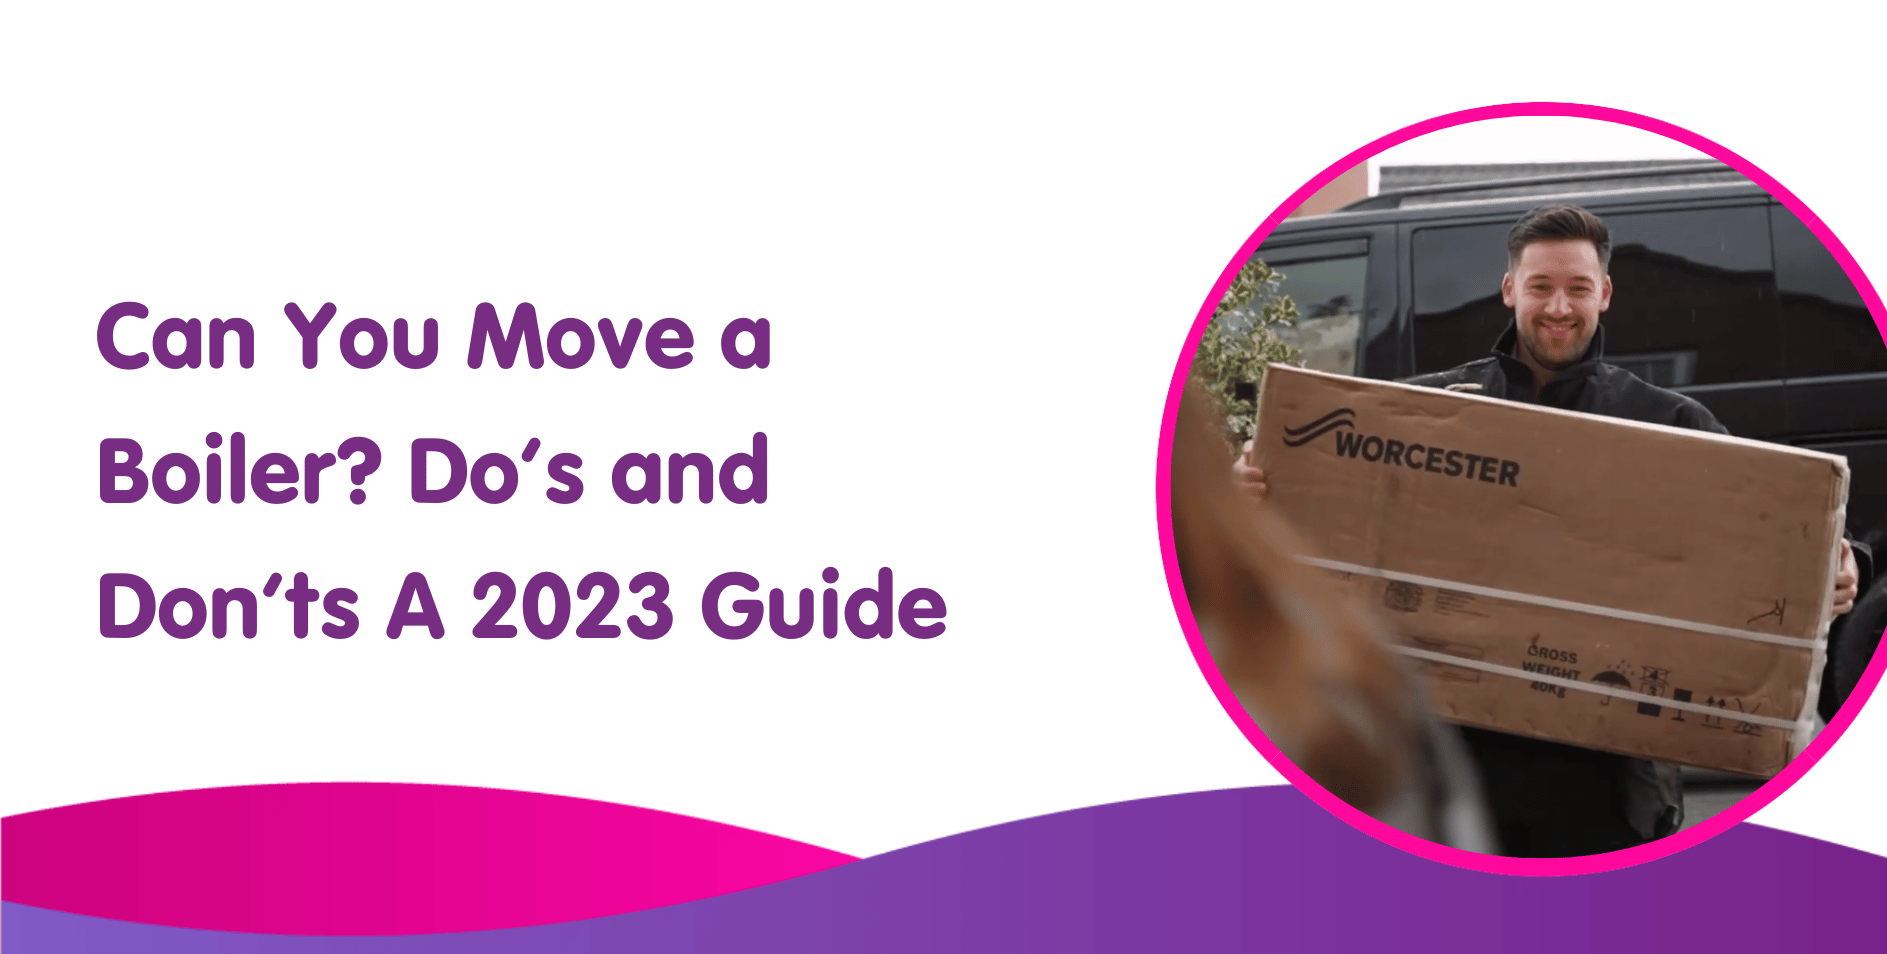 Can You Move a Boiler Do’s and Don’ts A 2023 Guide